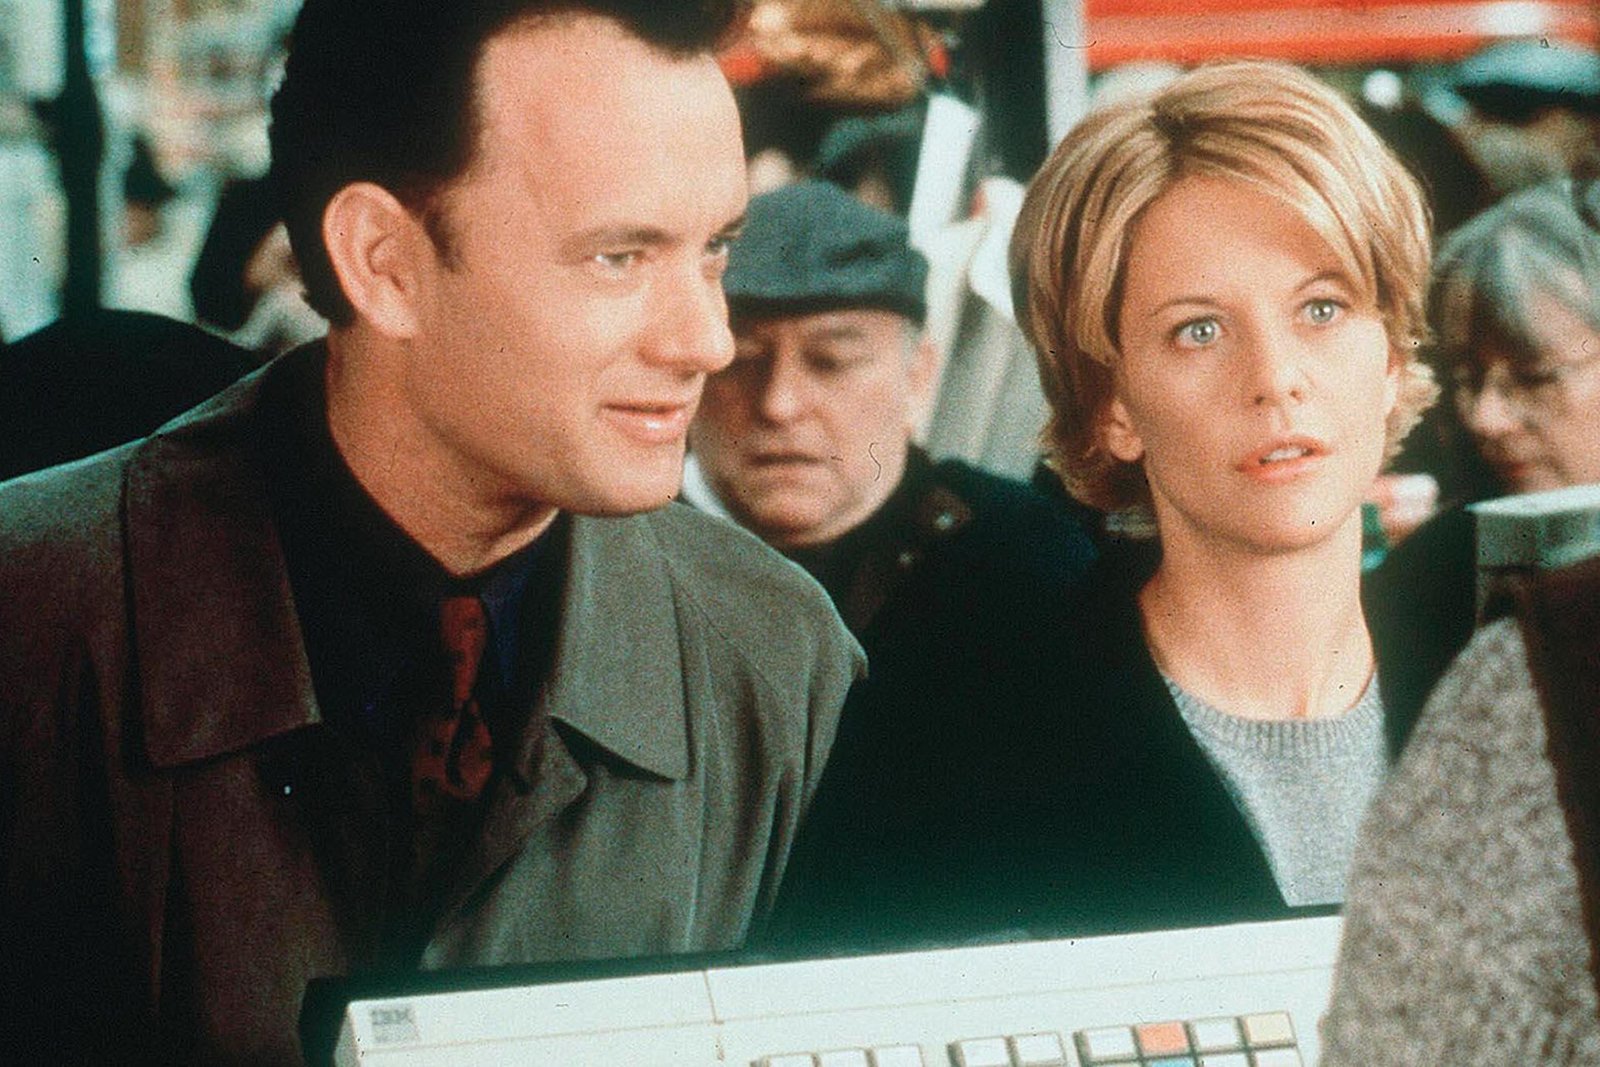 Best movies on HBO max: You've Got Mail (1998)